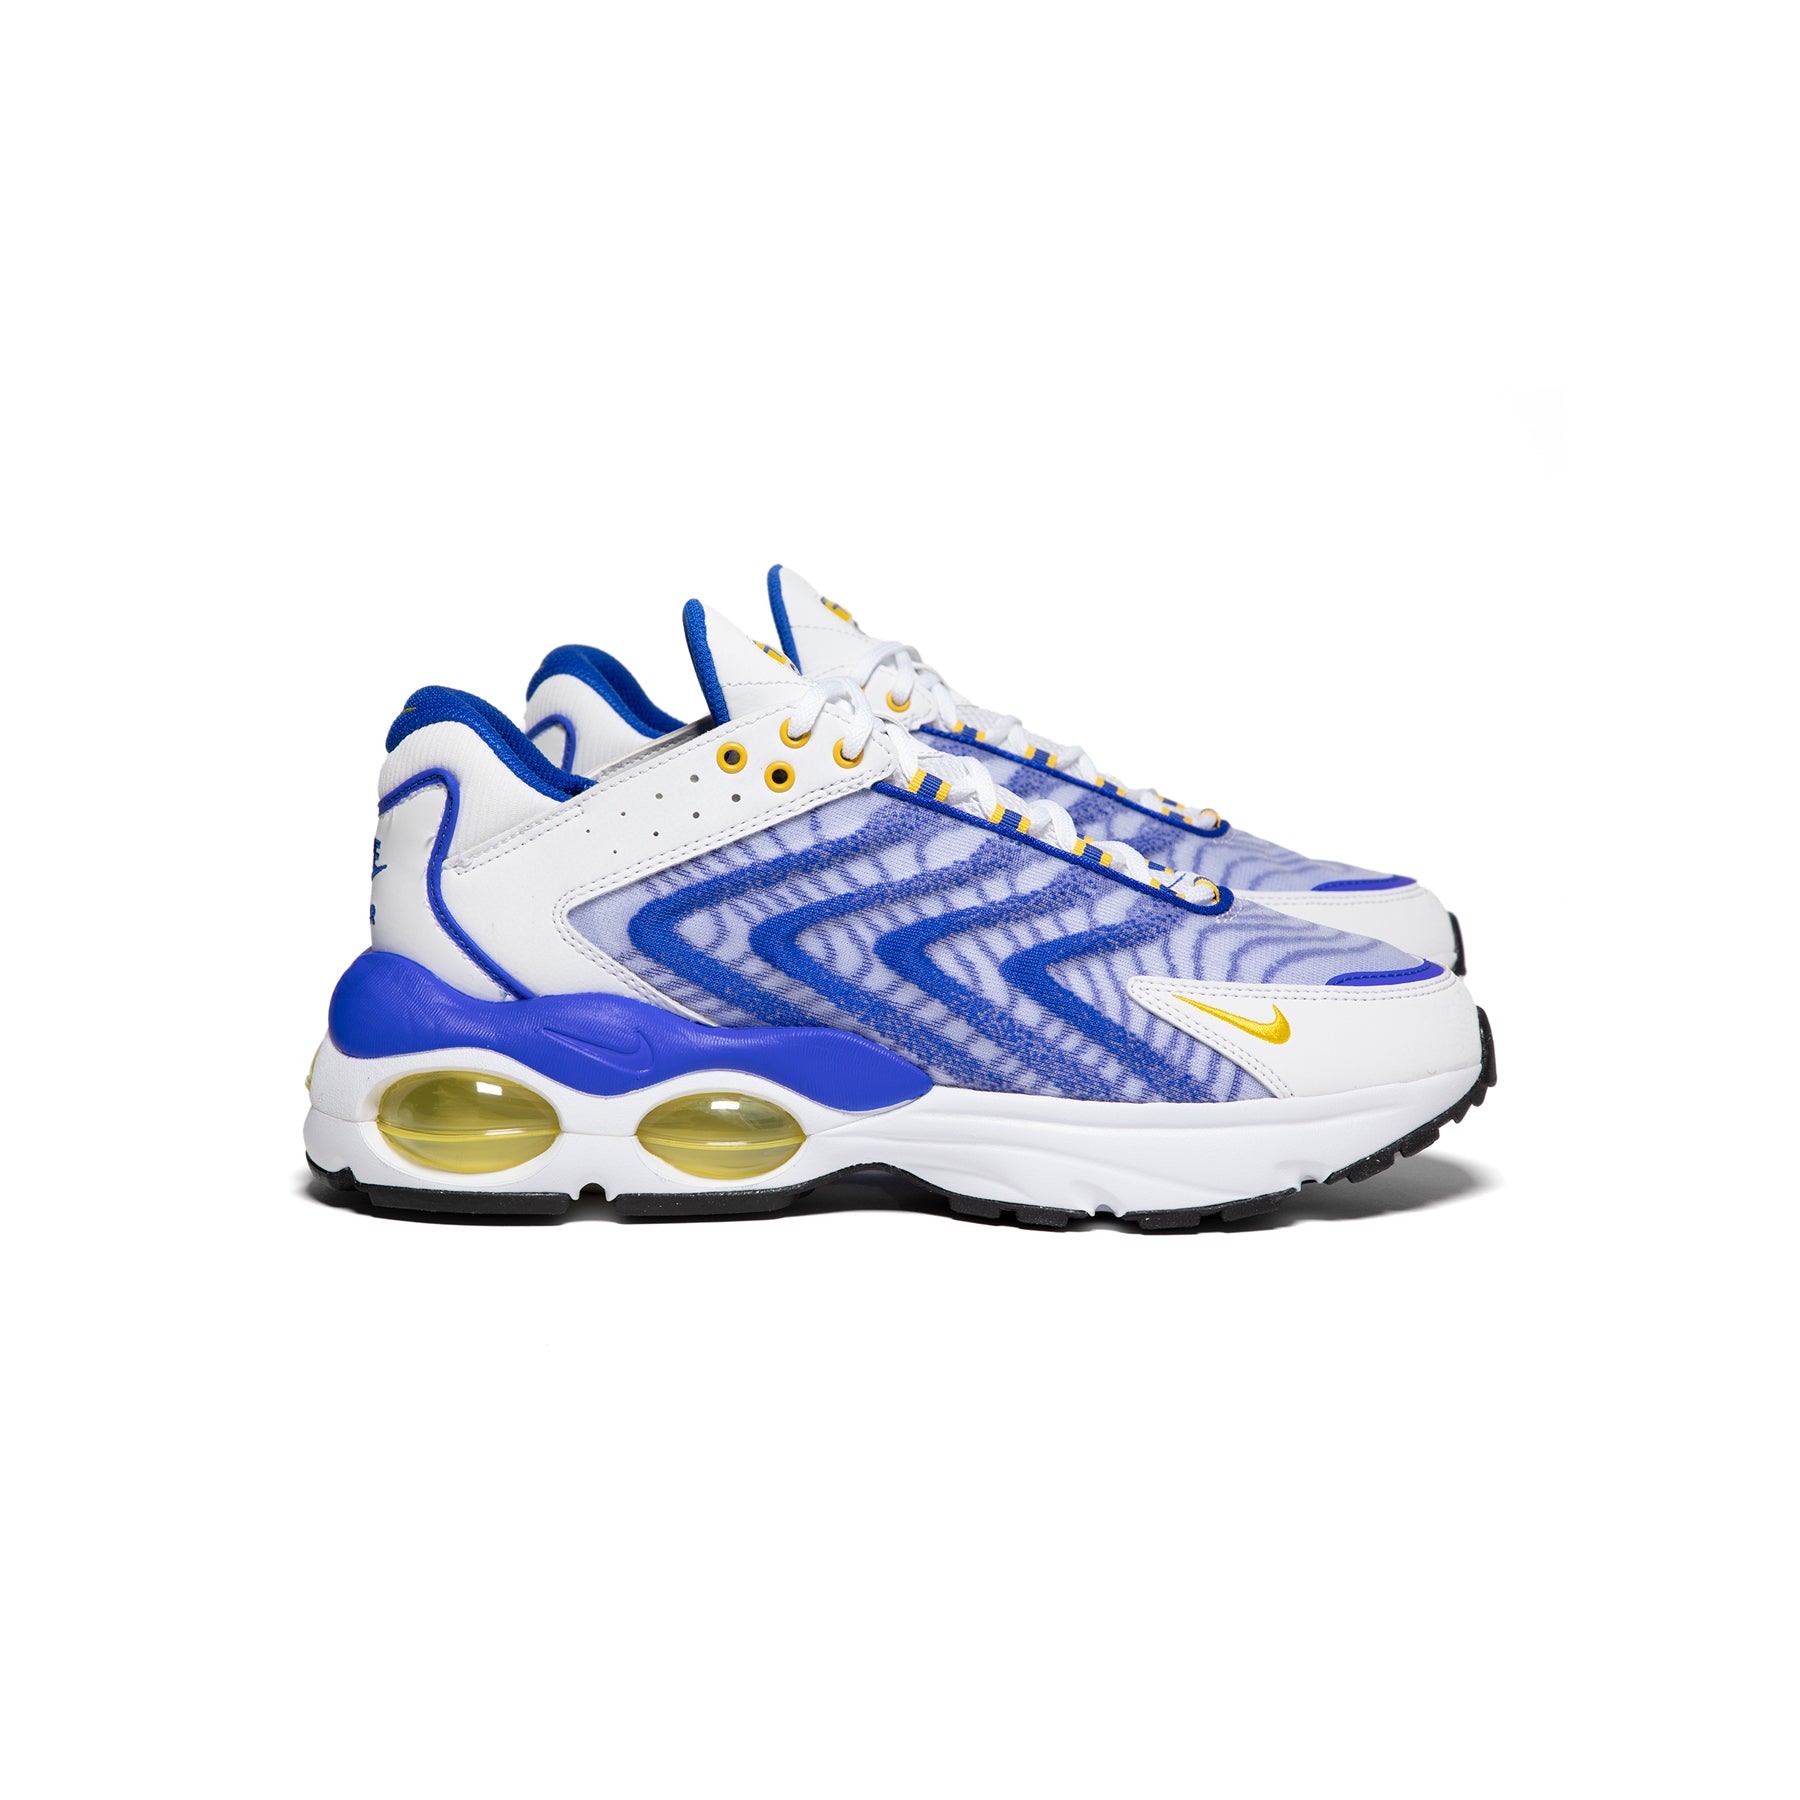 Nike Air Max TW (White/Soeed Yellow/Racer Blue/Black) – Concepts